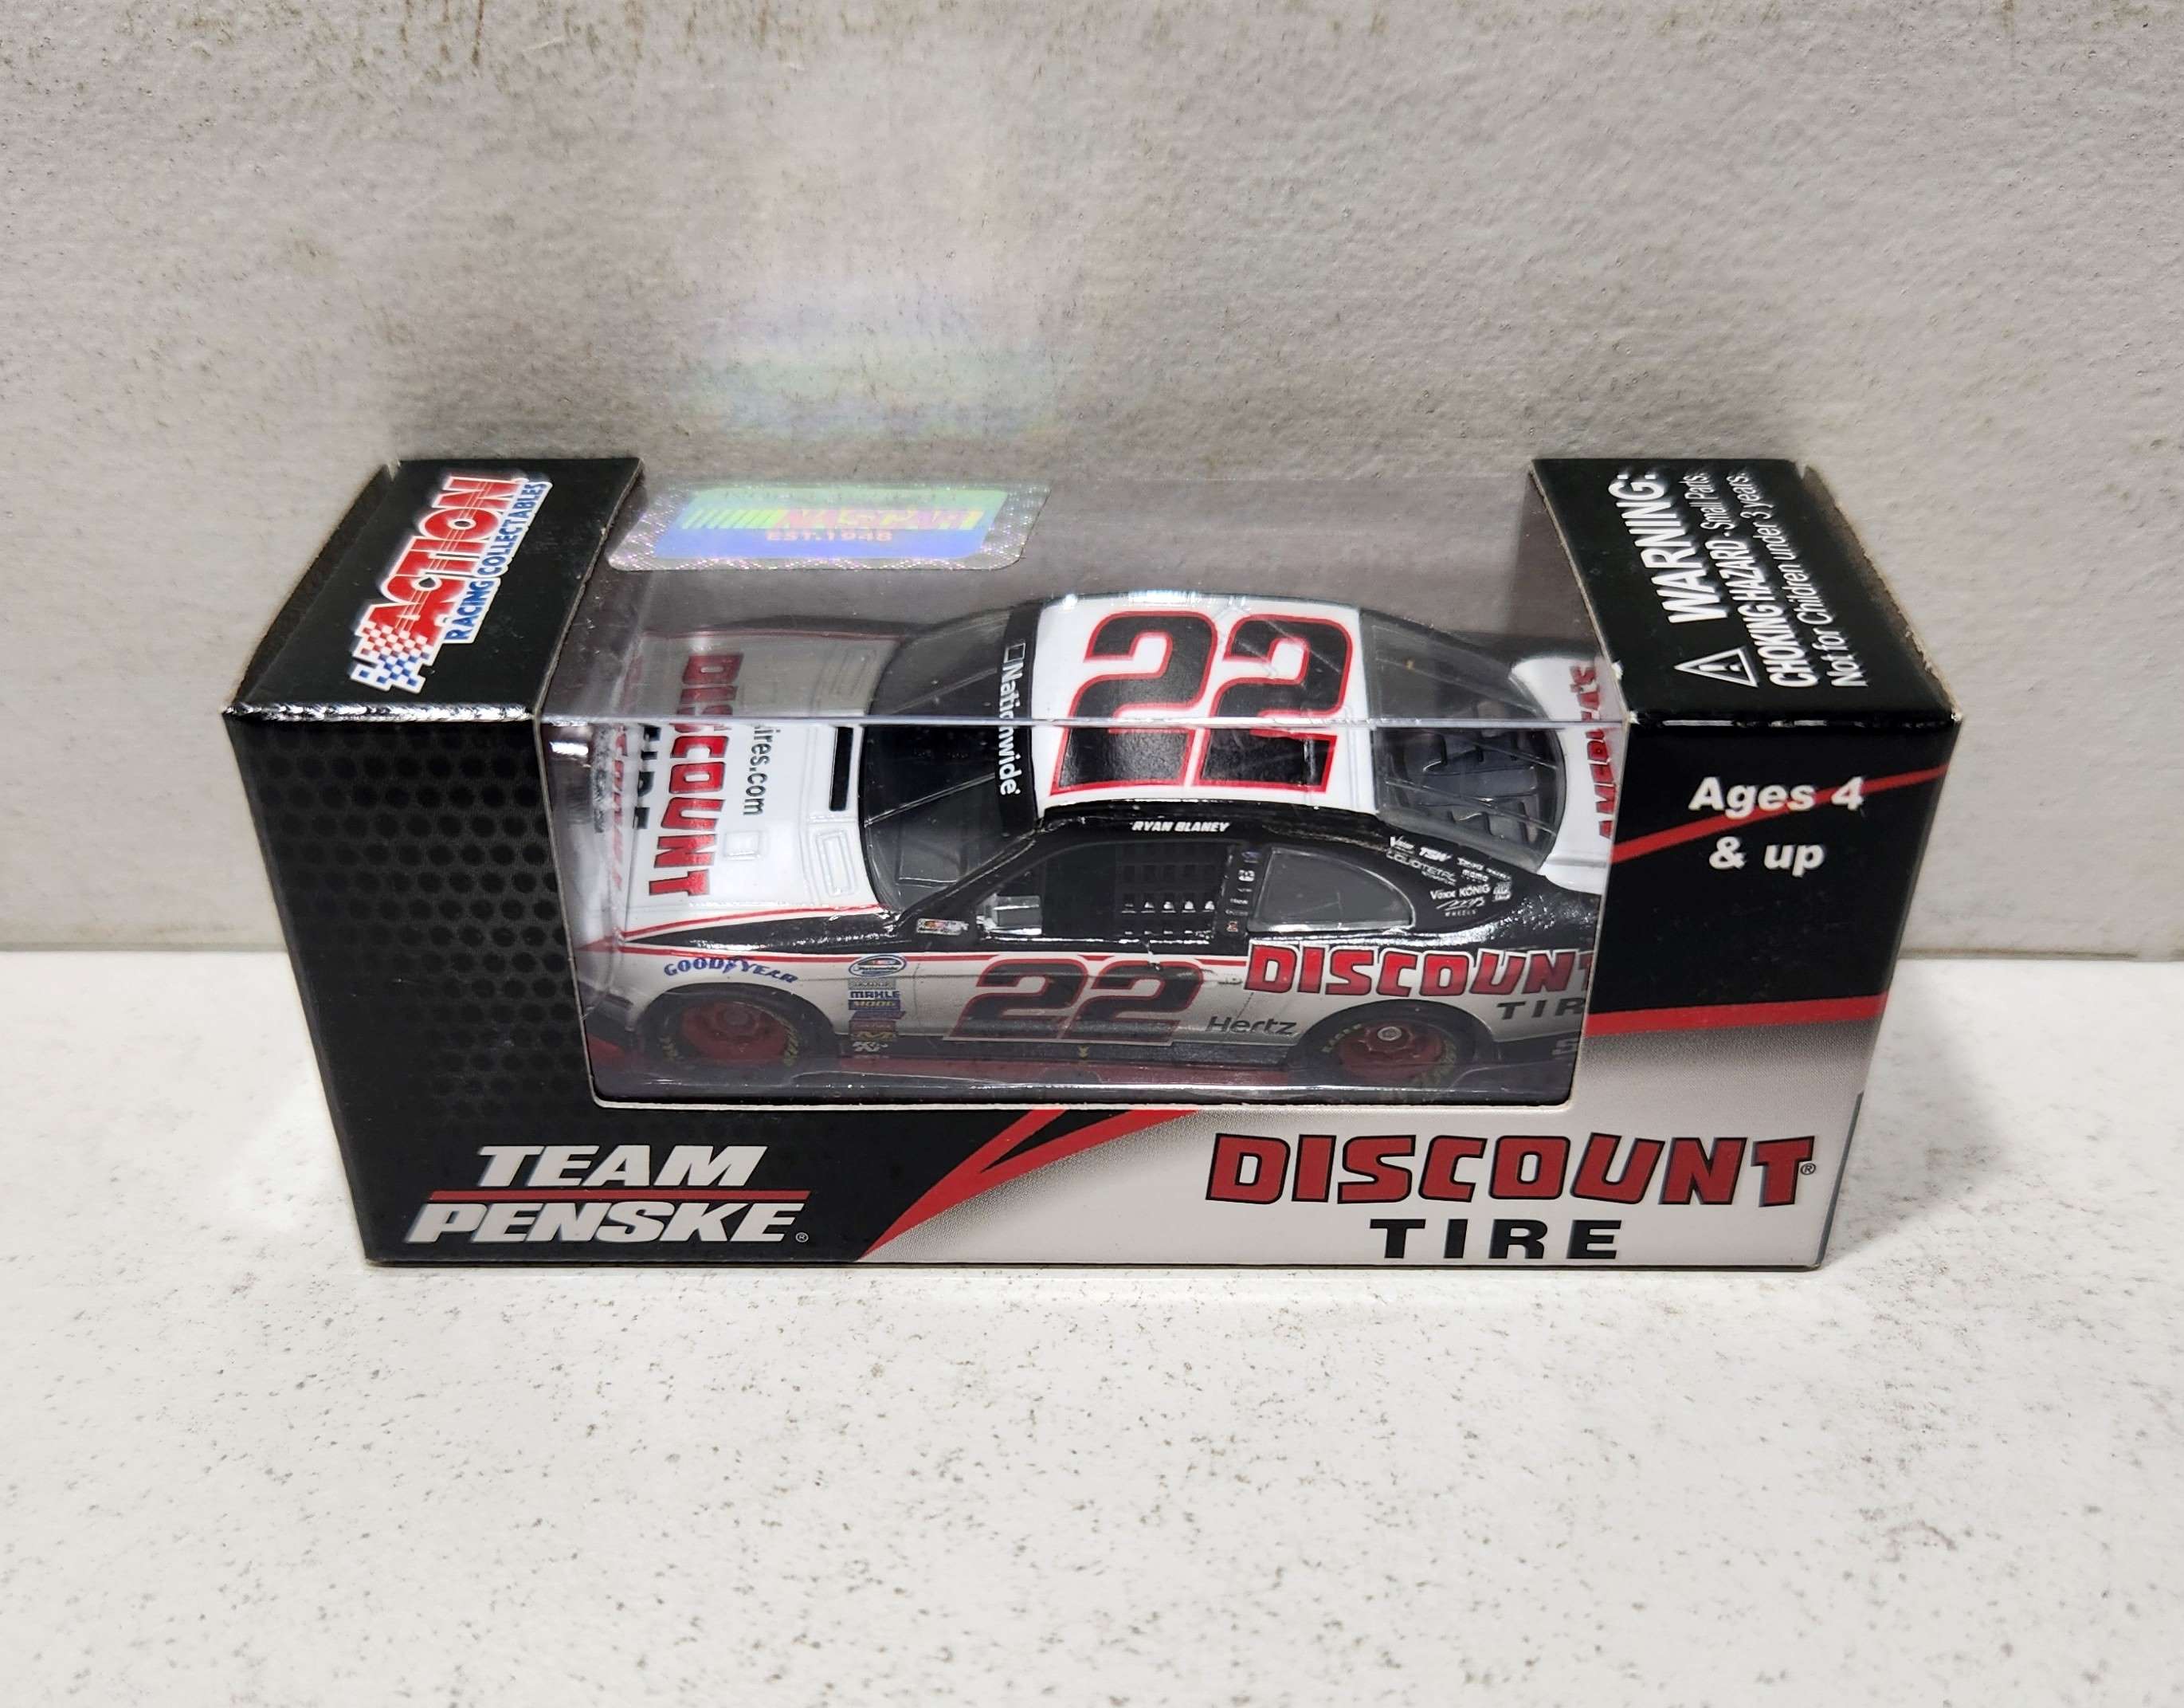 2014 Ryan Blaney 1/64th Discount Tire "Nationwide Series" Pitstop Series Mustang